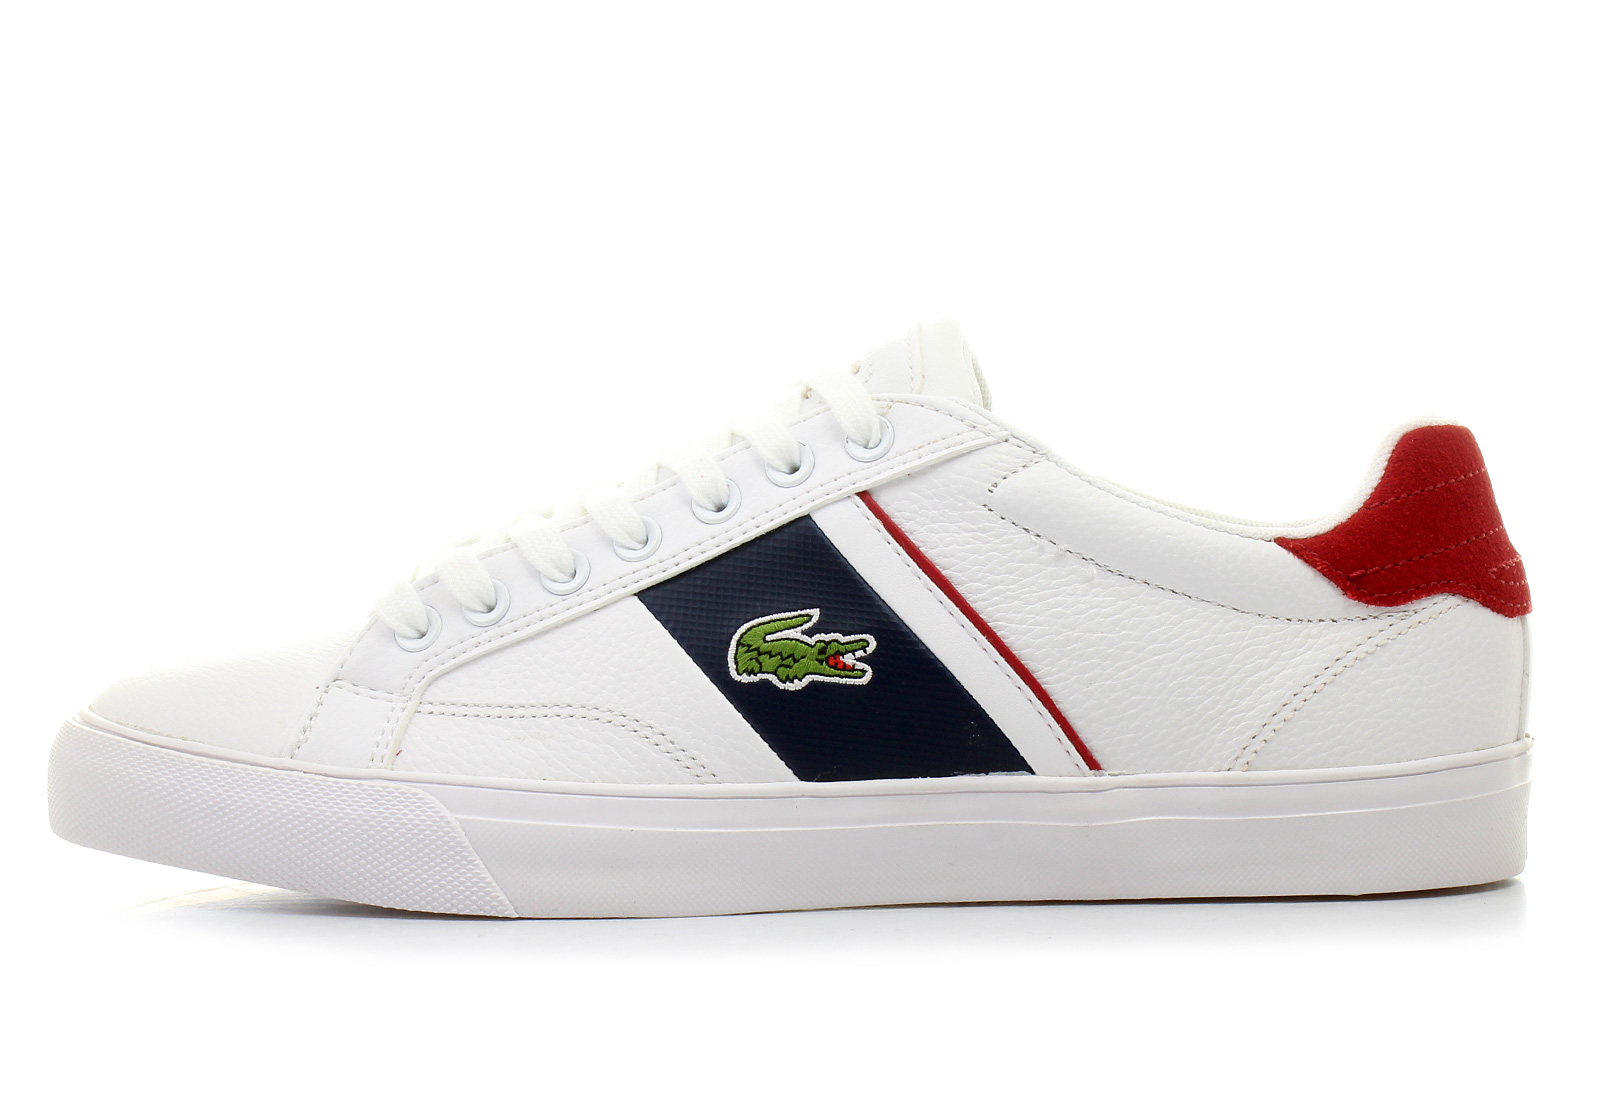 lacoste new collection 2018 shoes 